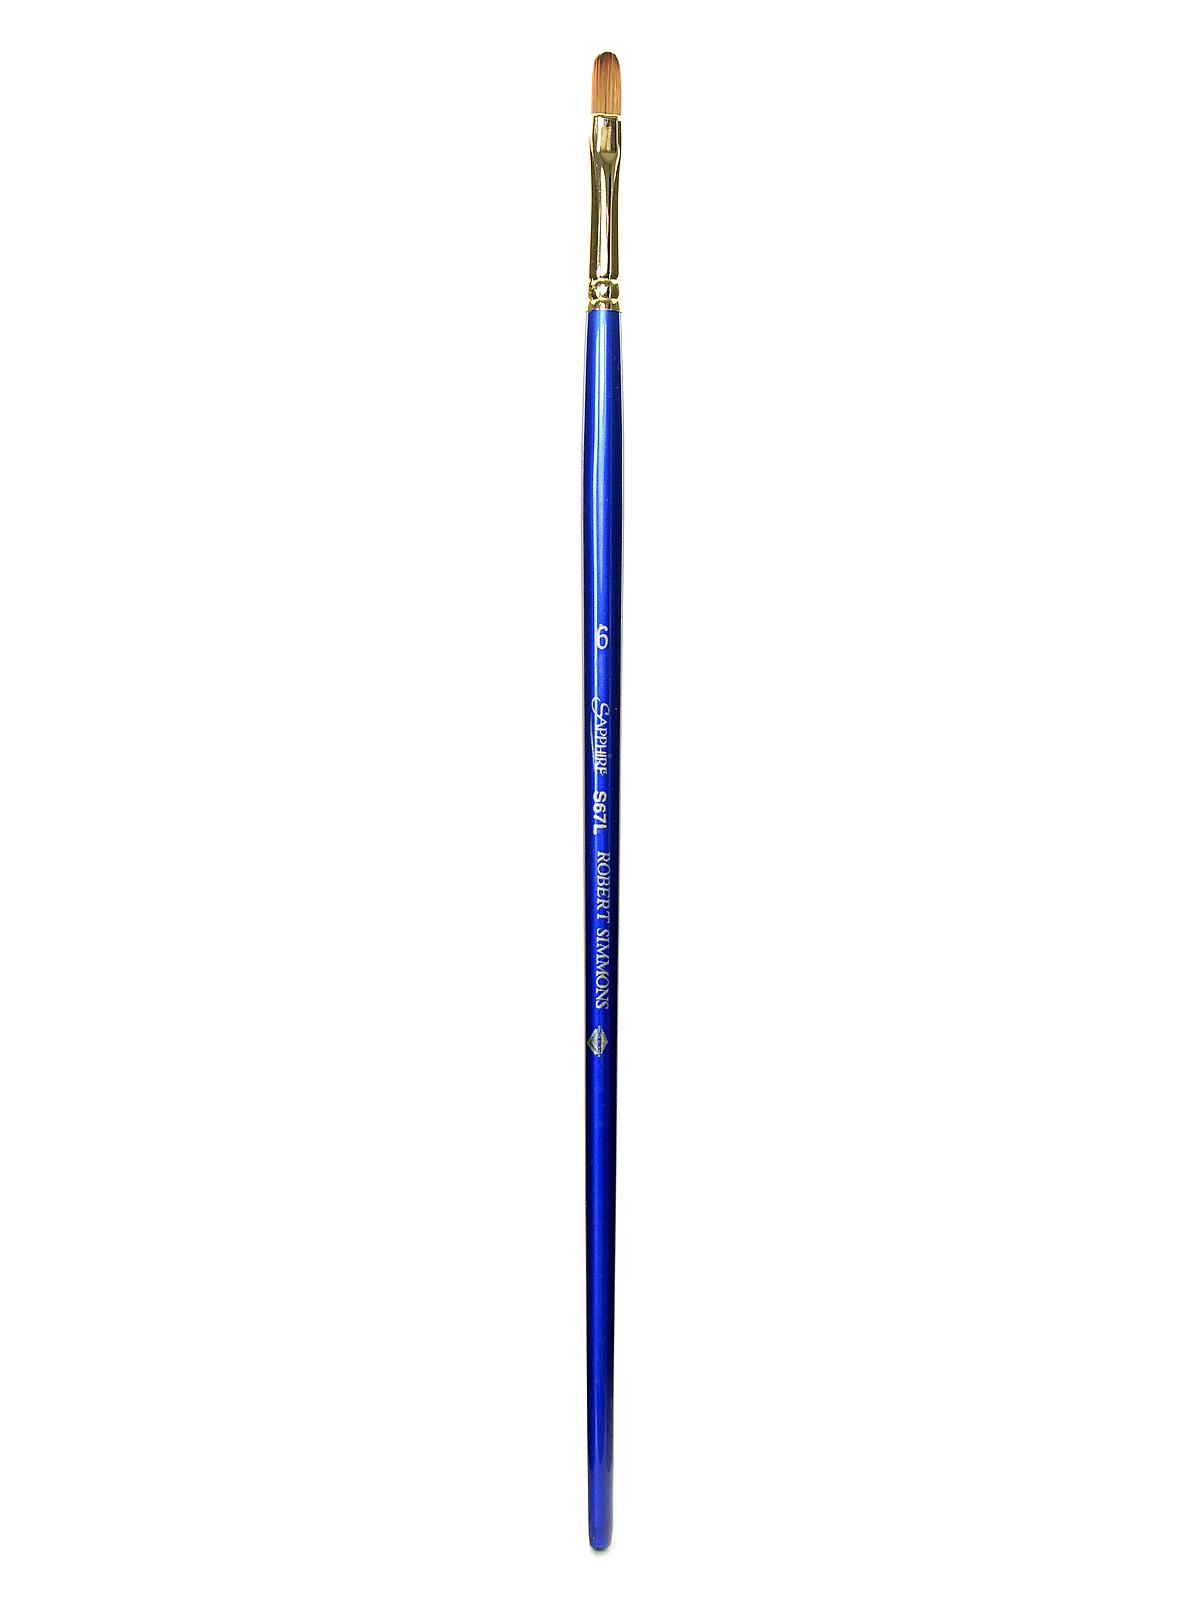 Sapphire Series Synthetic Brushes Long Handle 6 Filbert